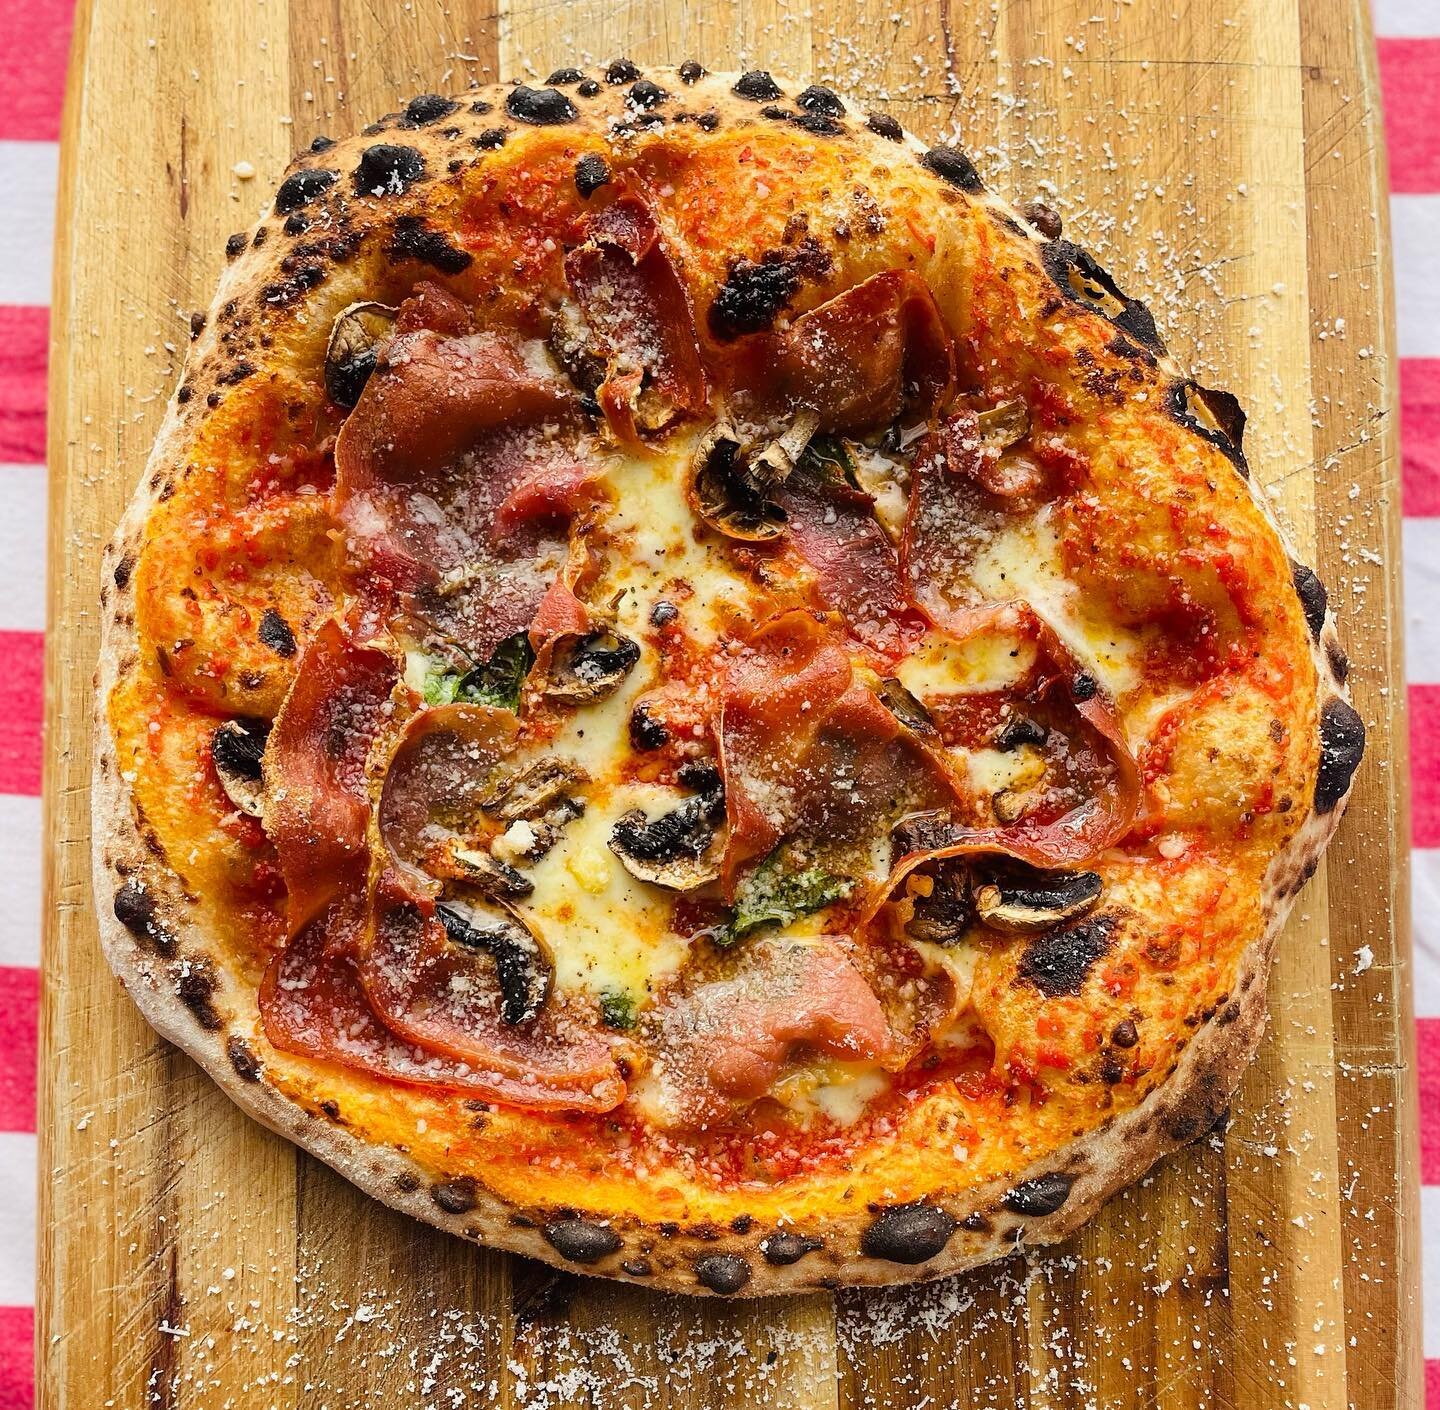 Just landed 🚀

Serrano Ham, Mushroom and Truffle 🤤

We asked you what you wanted on a recent poll and this was the overwhelming favourite! Don&rsquo;t worry veggies, we&rsquo;ve got you covered, you can remove the ham 😉 

#pizza #pizzalover #pizza